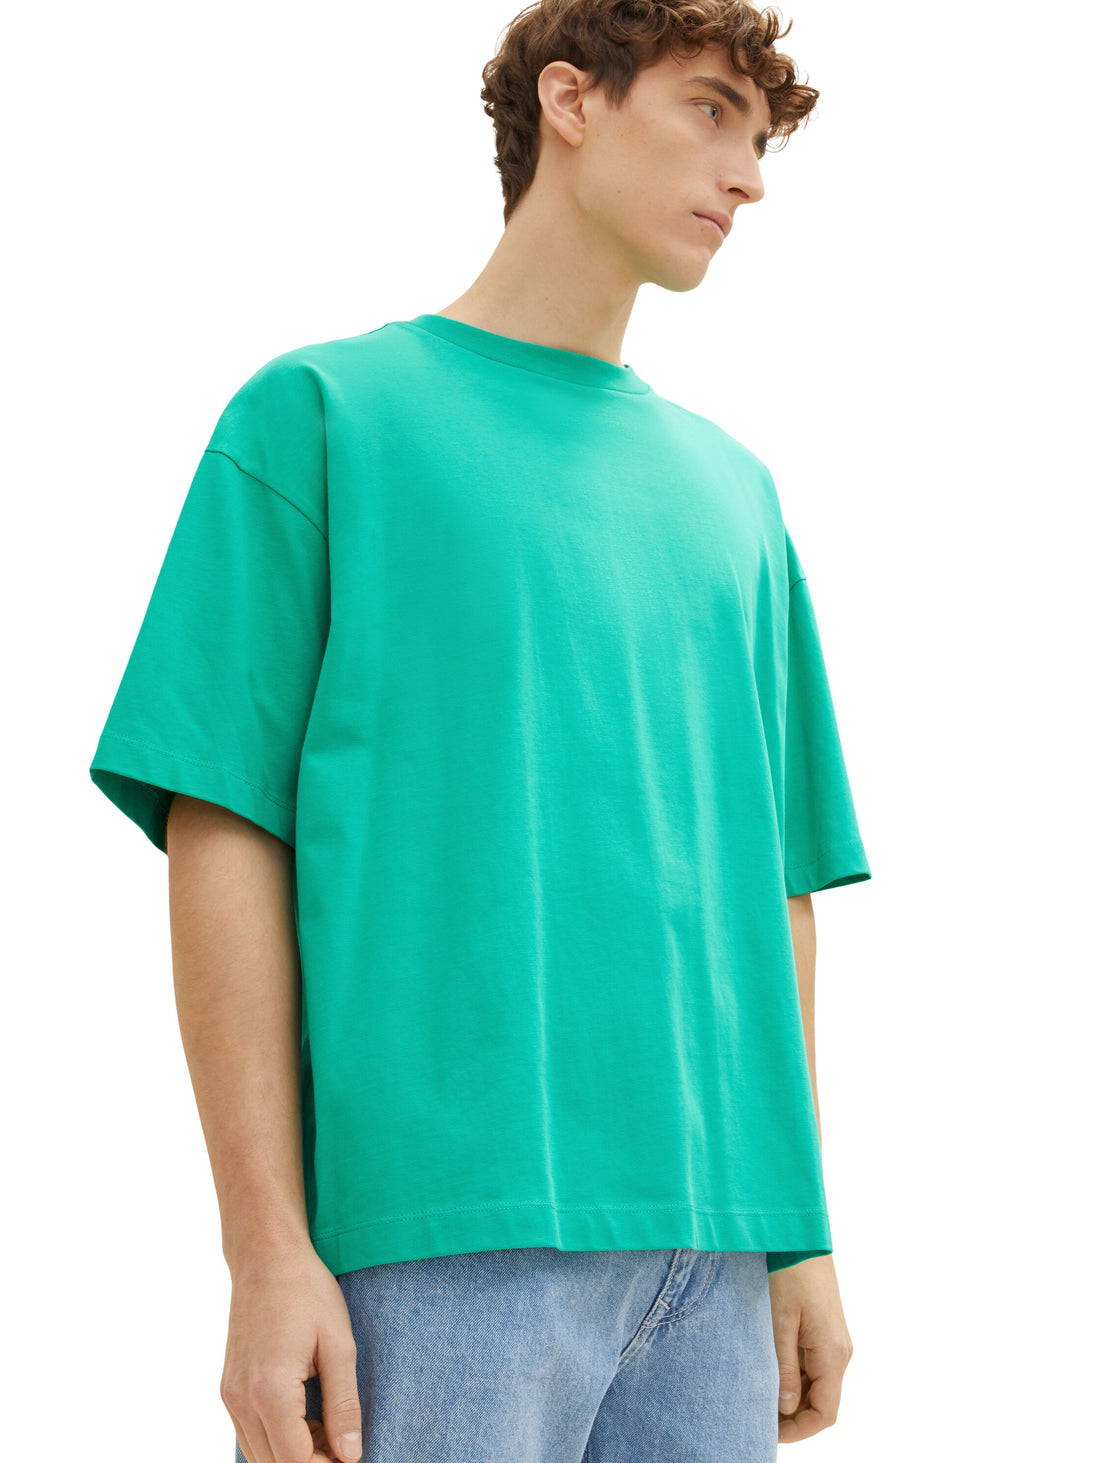 Green Over-sized Short Sleeve T-Shirt